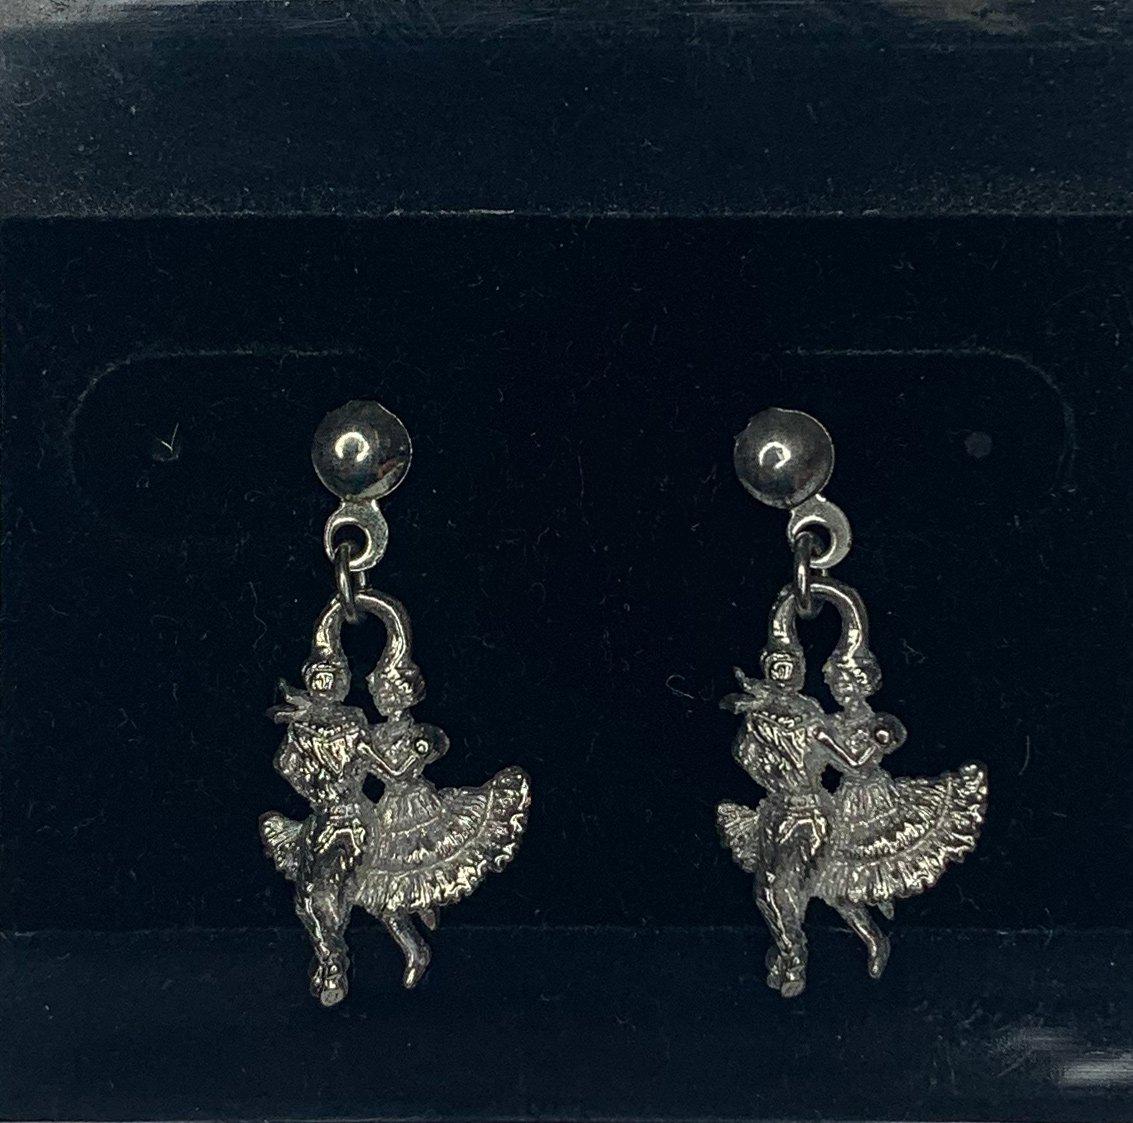 Silver Dangling Square Dancer Earrings, Jewelry - Square Up Fashions